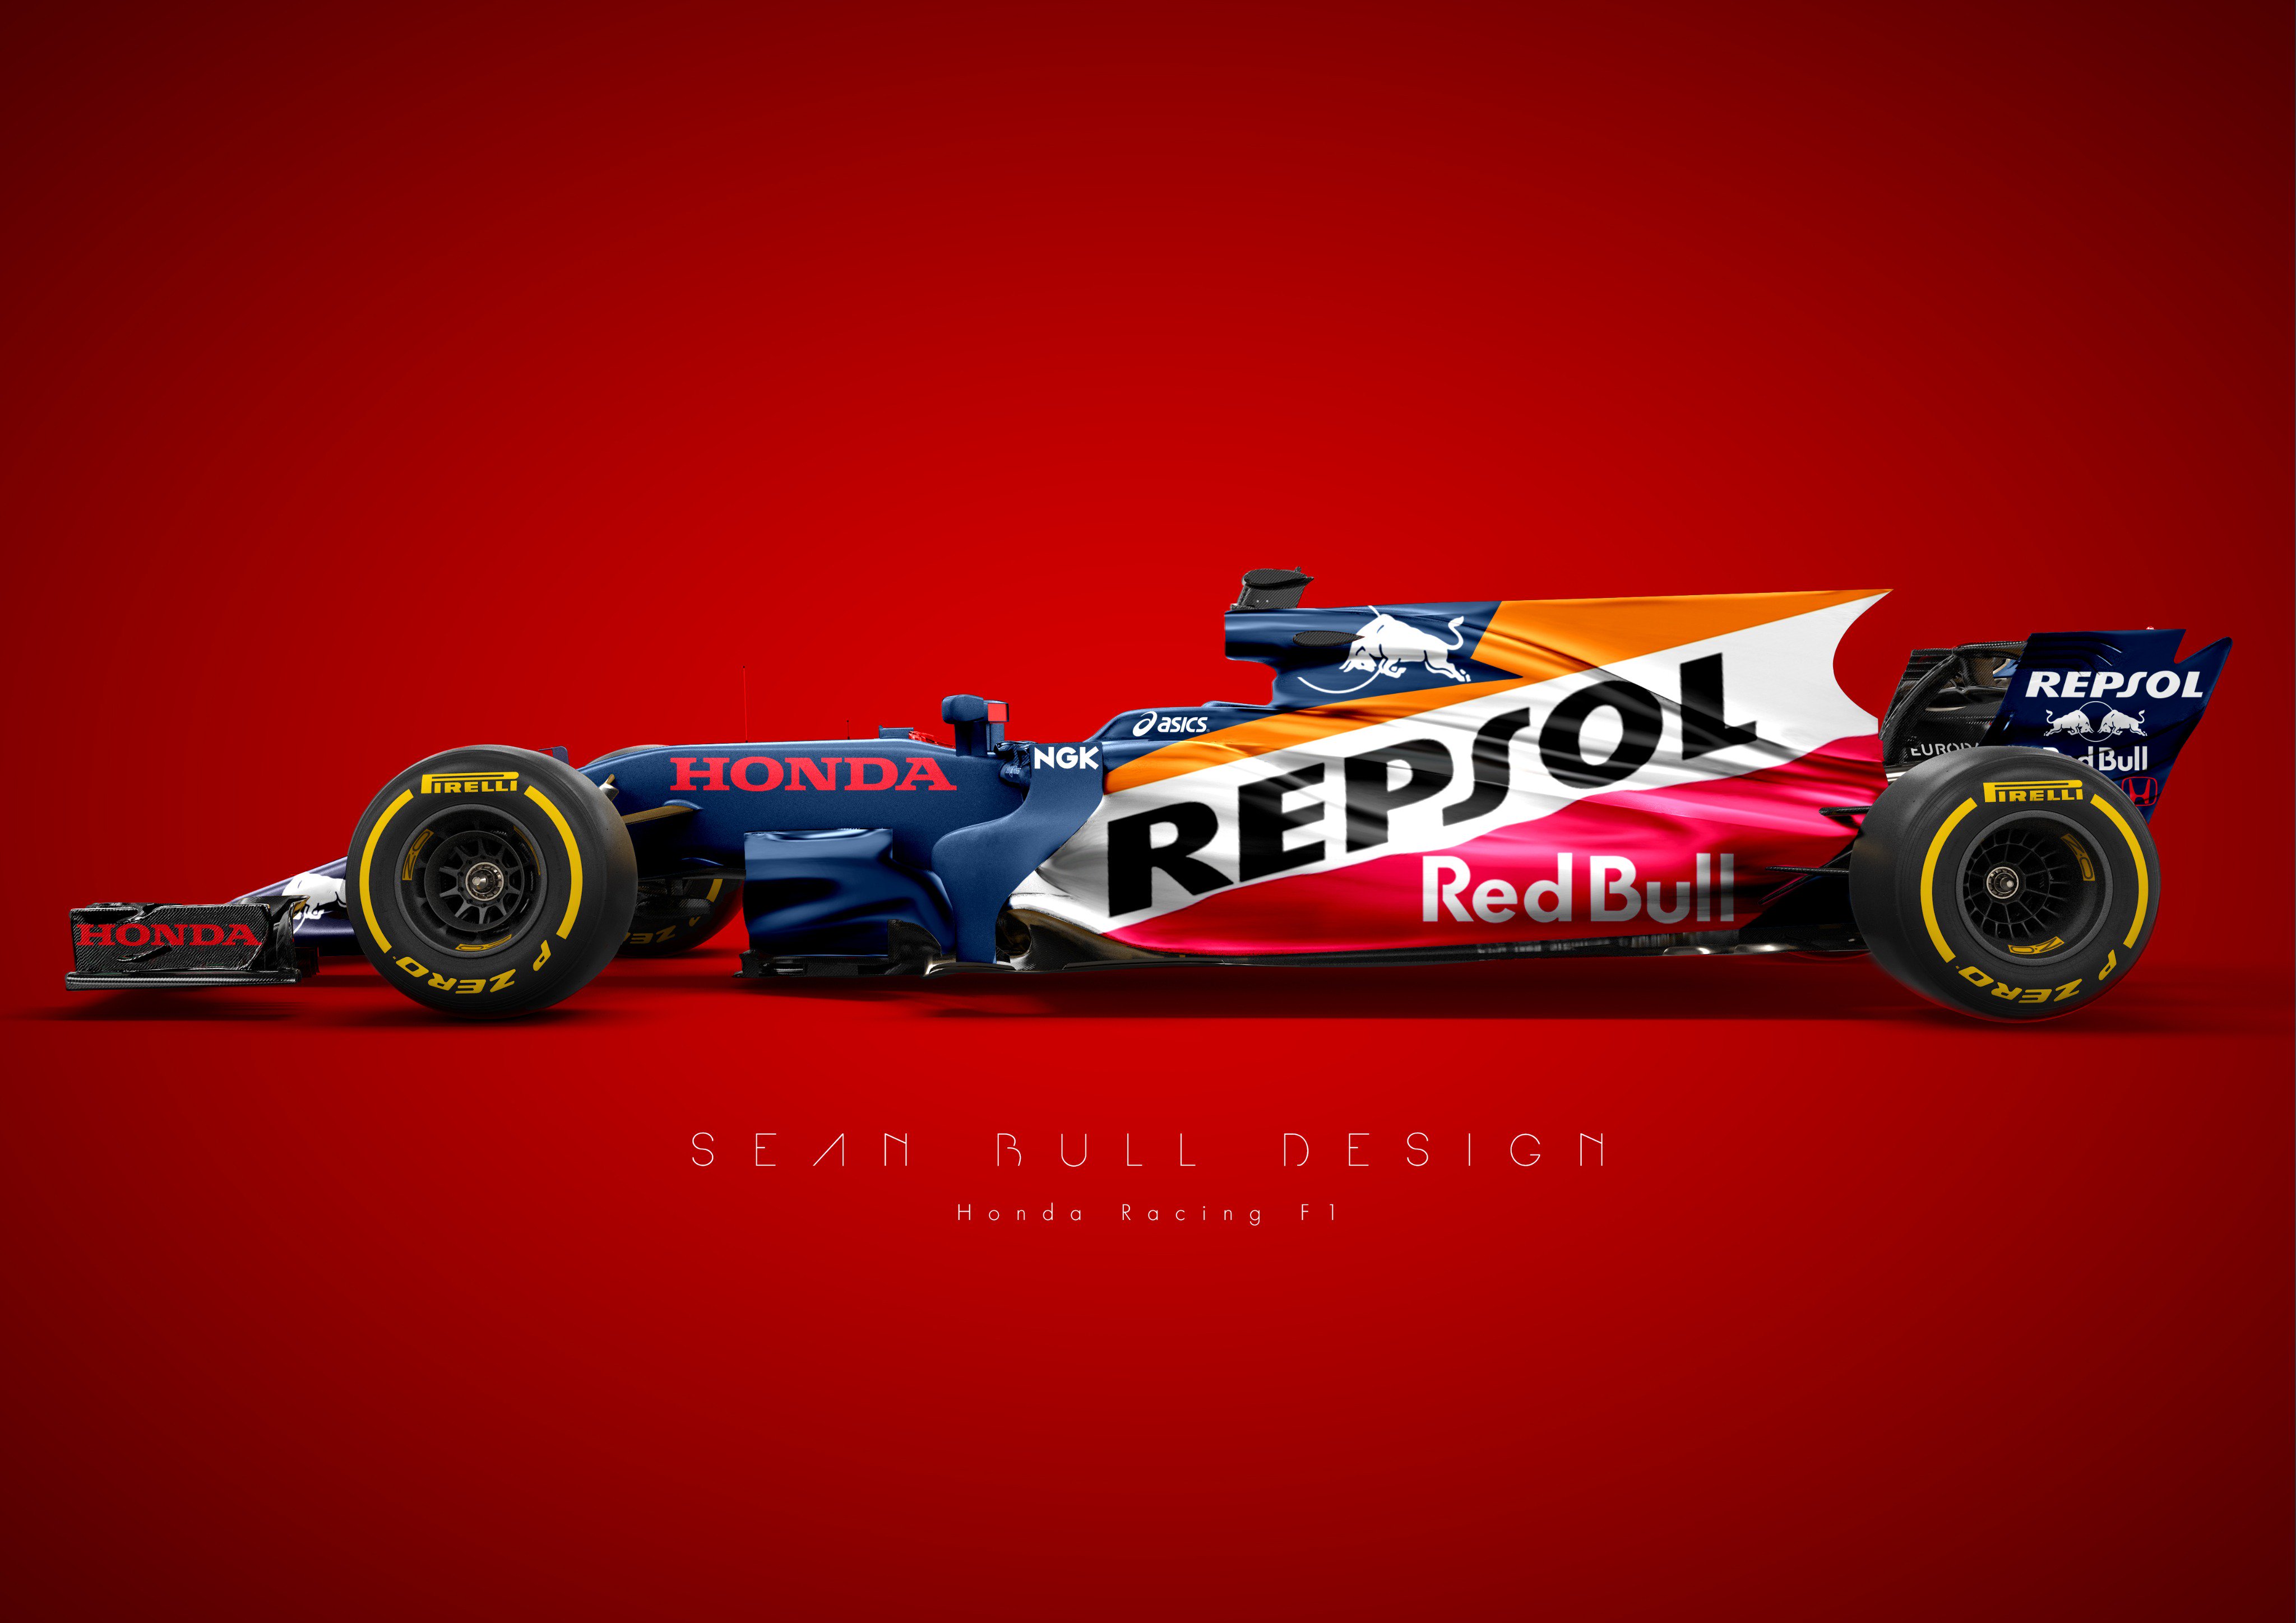 Sean Bull Design on Twitter: "With rumours of @HondaRacingF1 buying their  own team what design would you like to see for a honda works team? #honda  #hondaf1 #f1 #f1207 https://t.co/iSVn9HtqLM" / Twitter